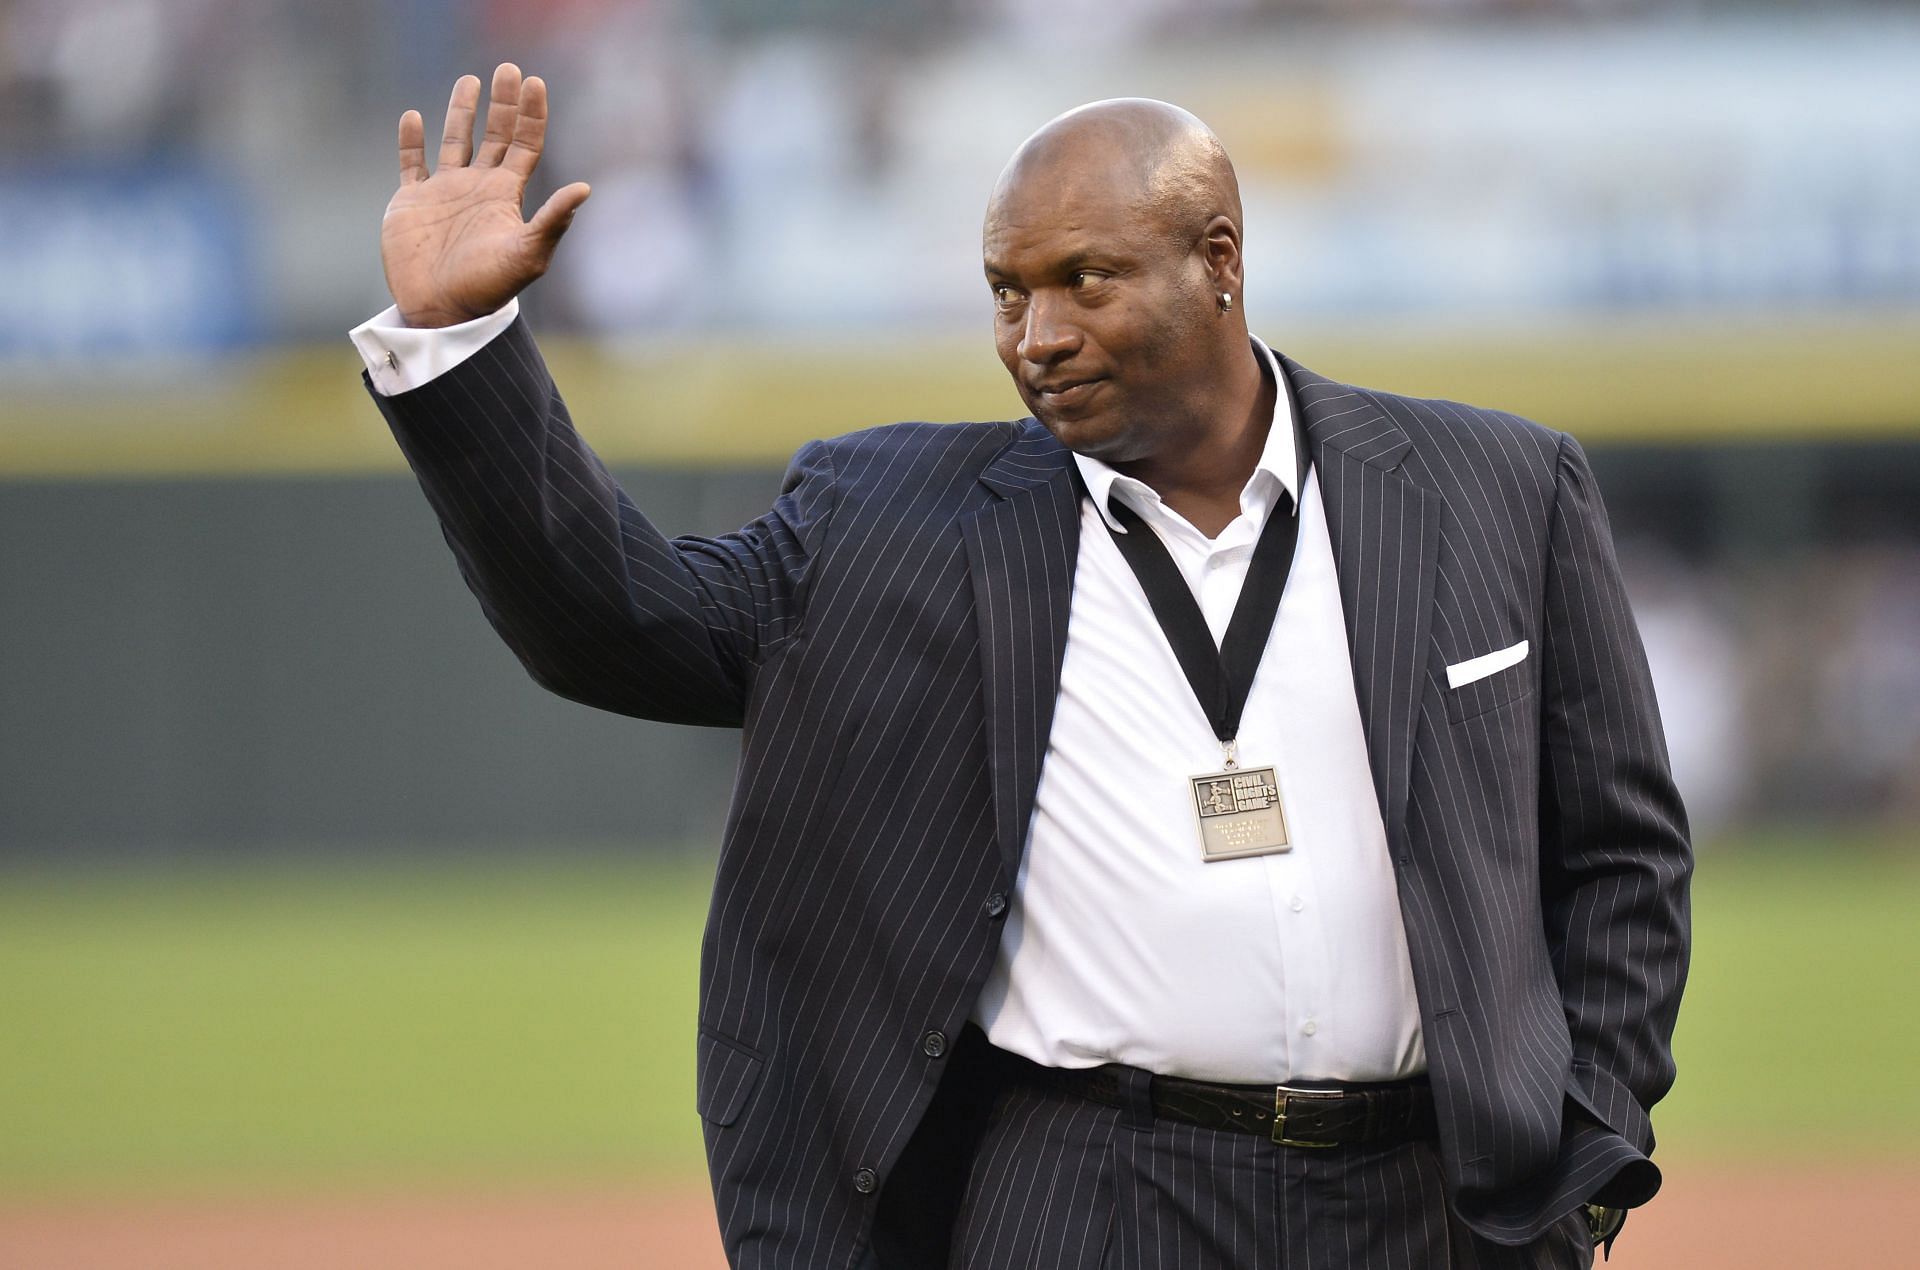 Bo Jackson being honored